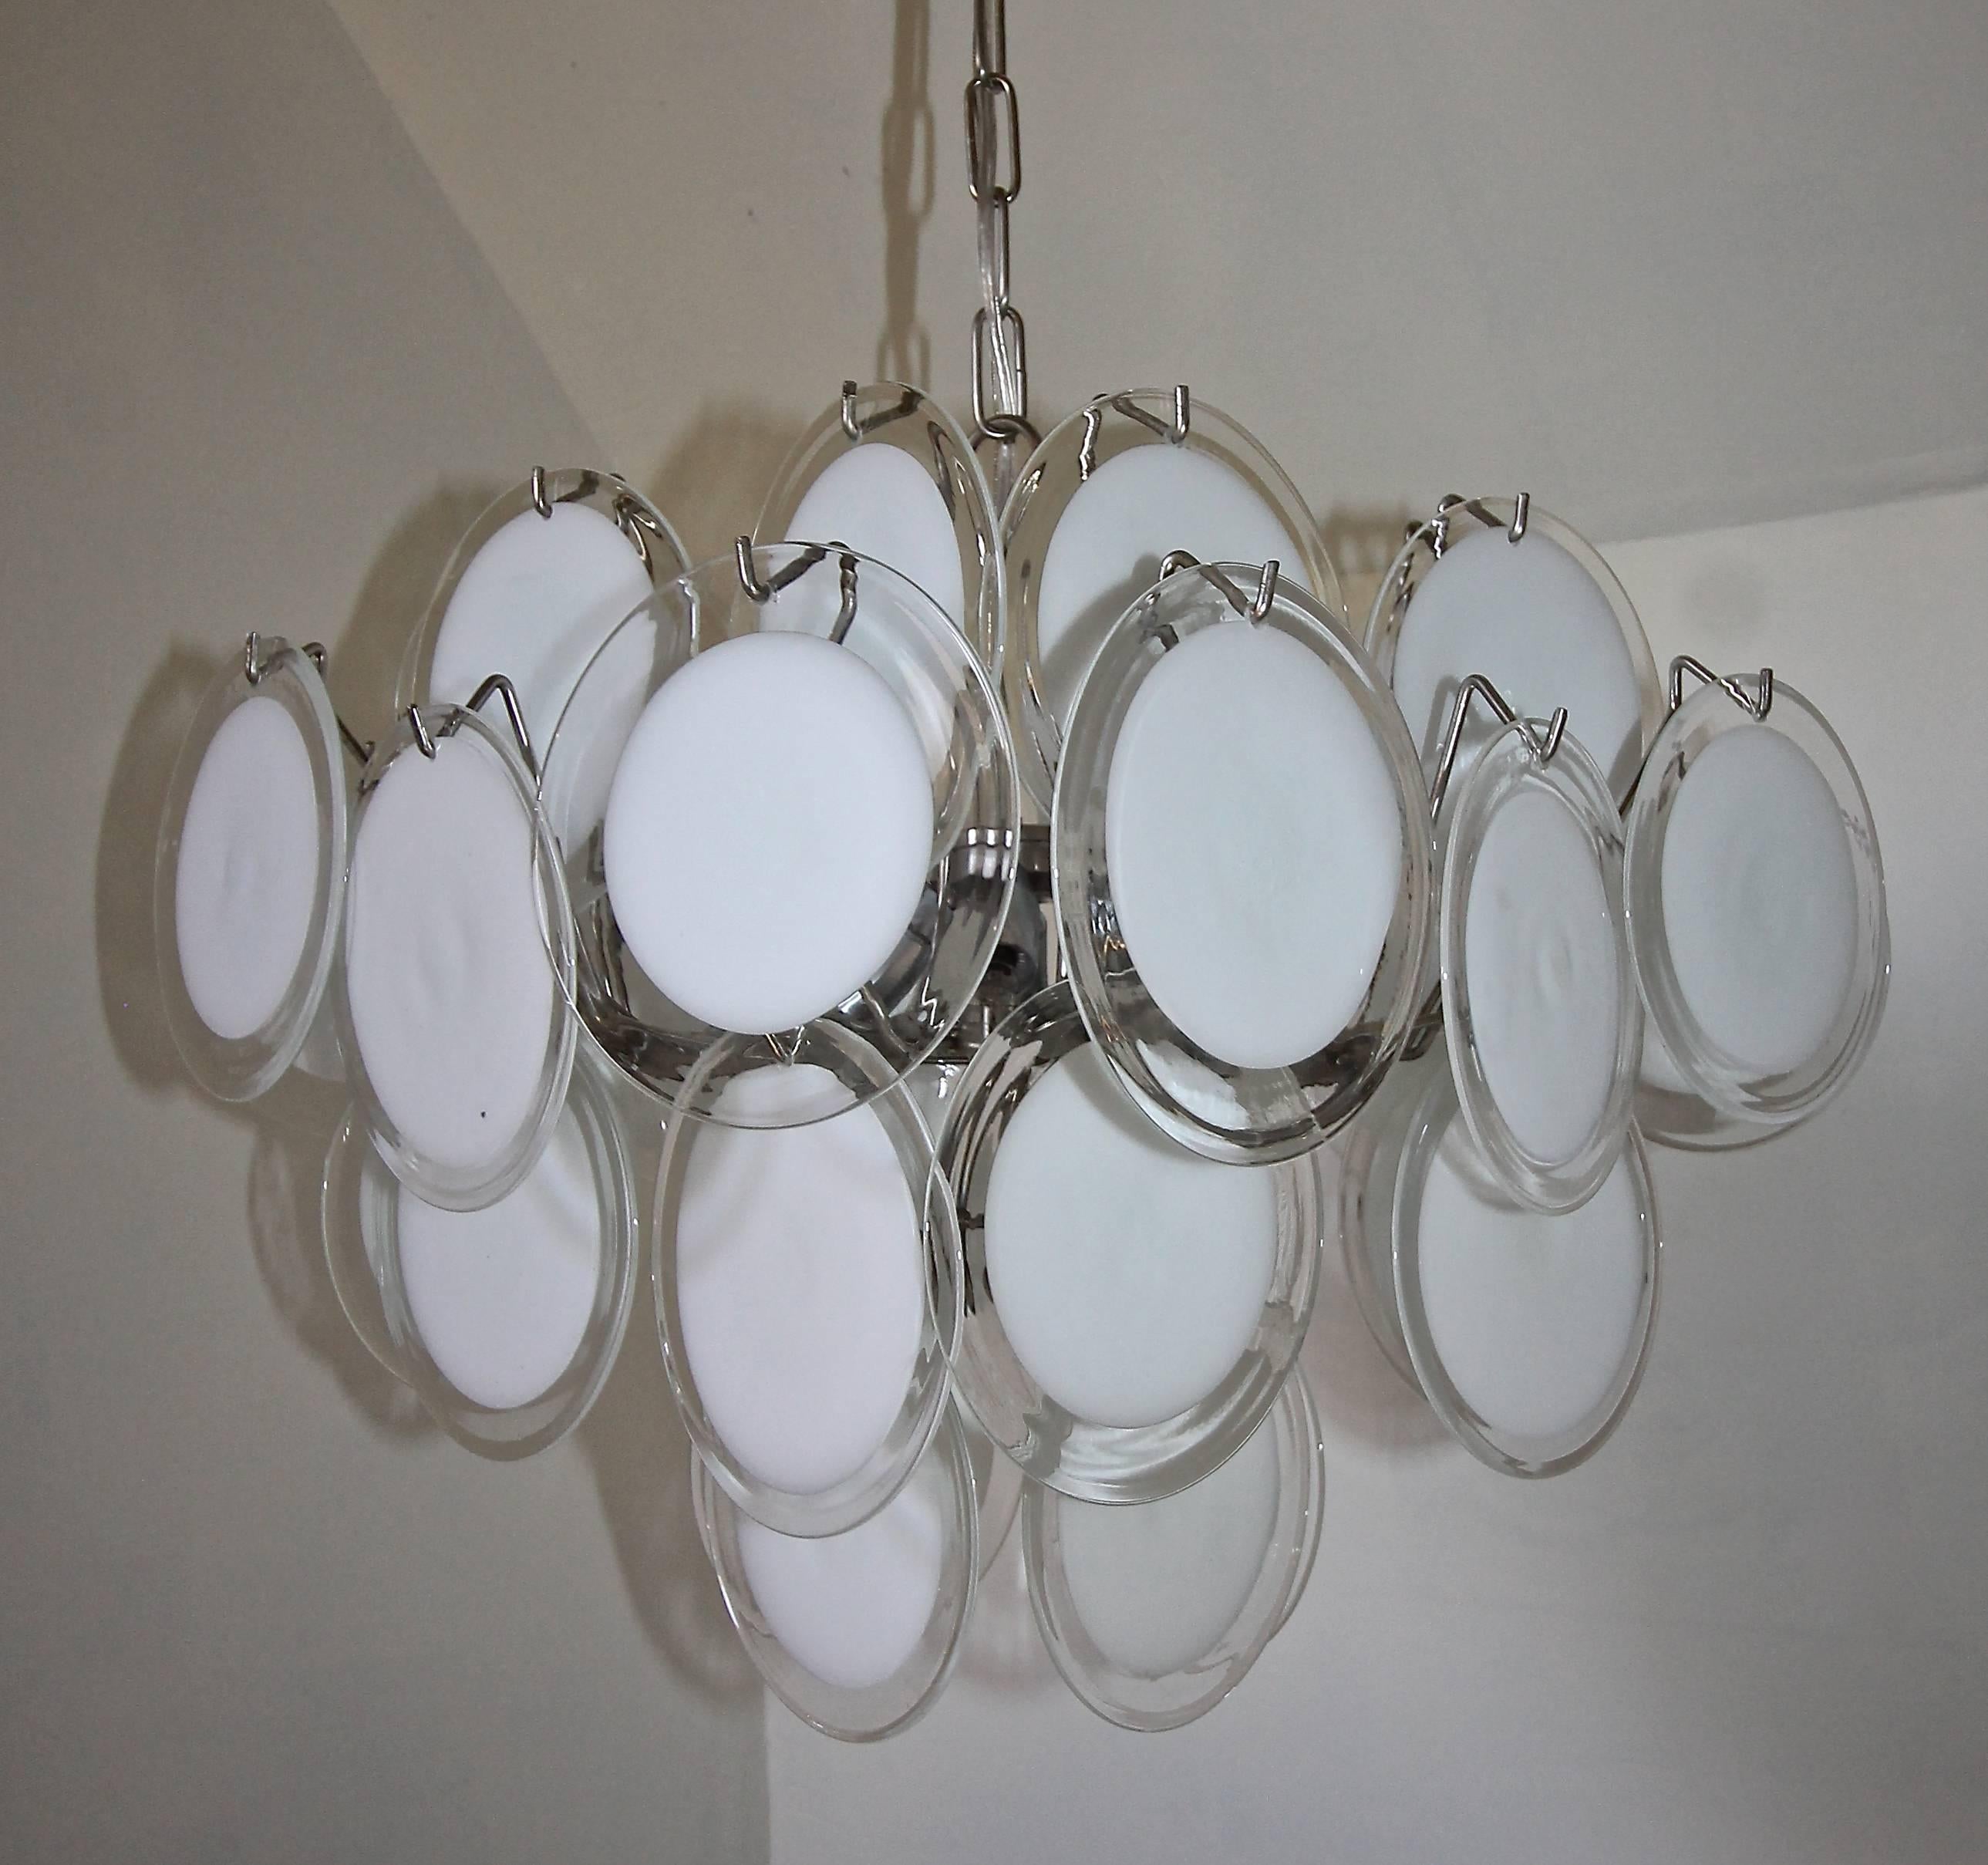 Clear and white disc Murano Italian glass four-light chandelier. Steel frame. Uses 4 - 40 watt max candelabra base bulbs, newly wired. The diagonal length is 24